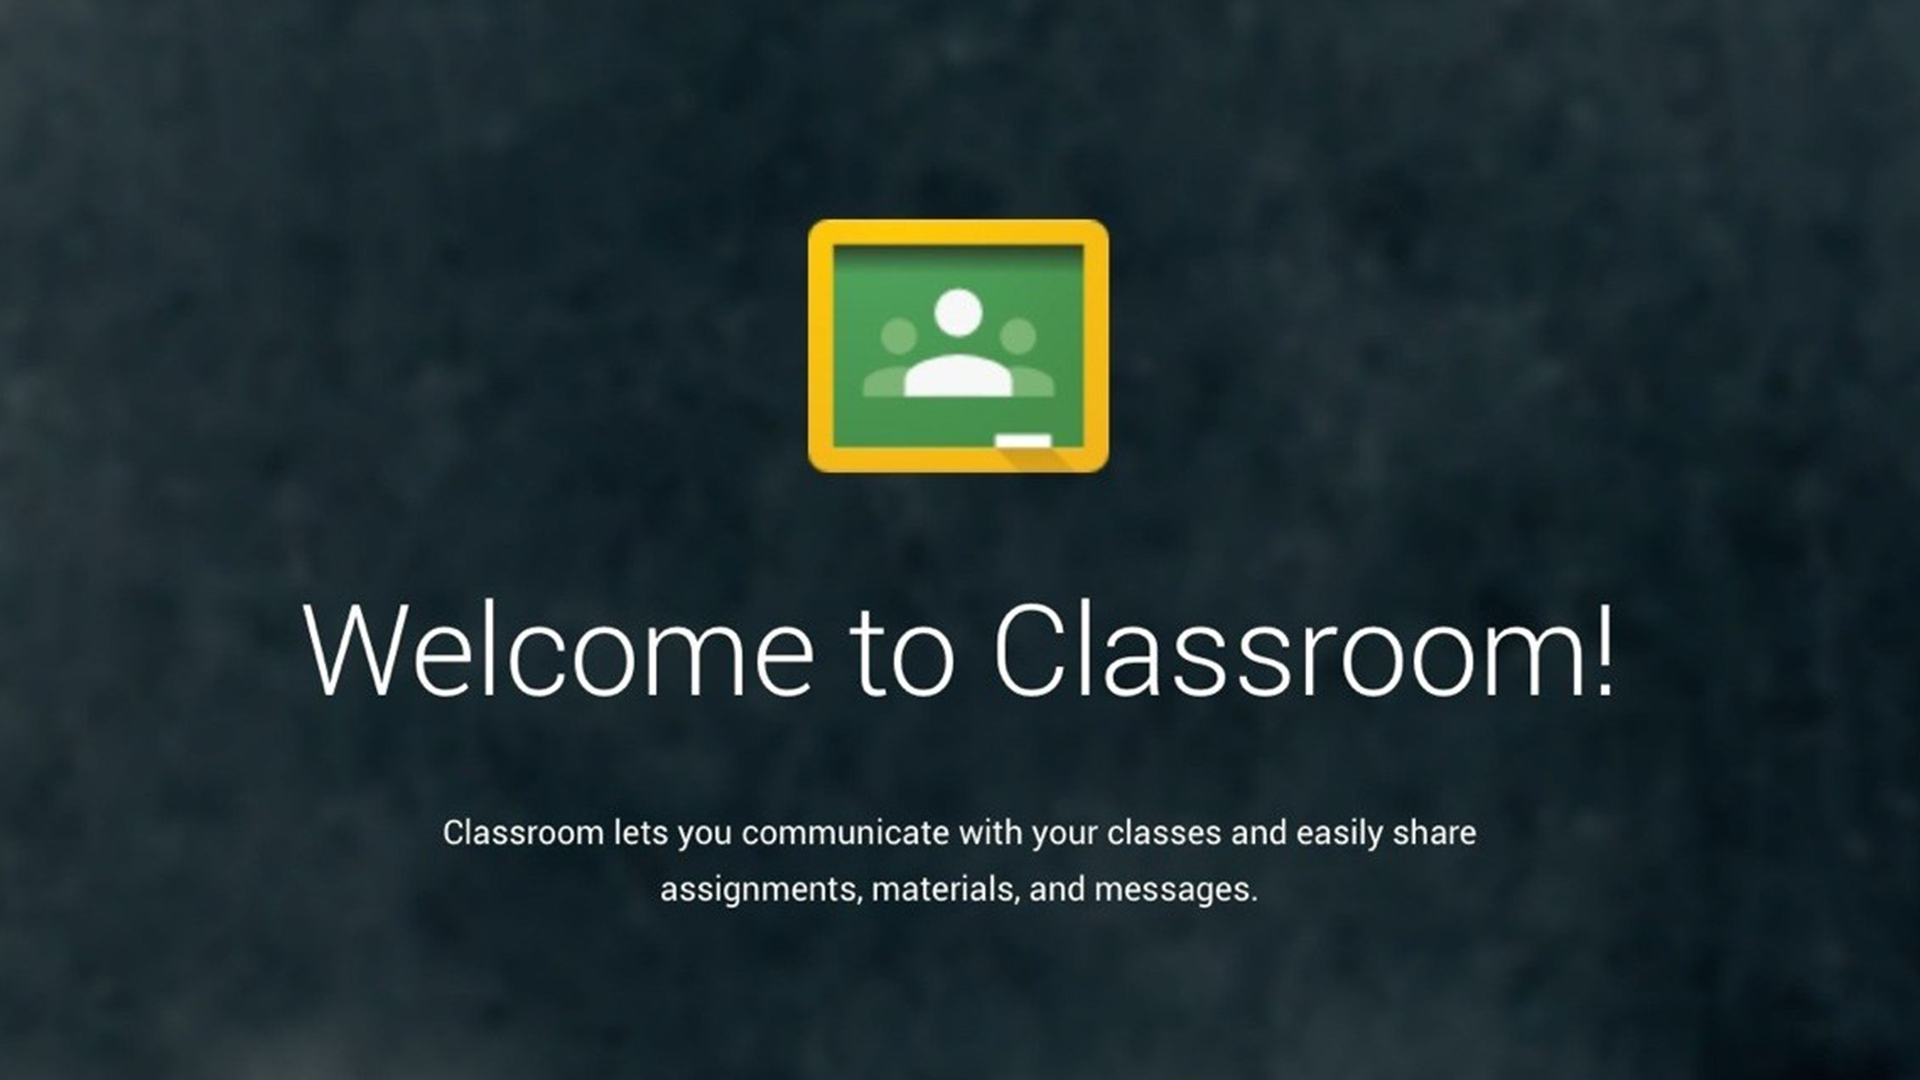 Looking For The Google Classroom Login Page?